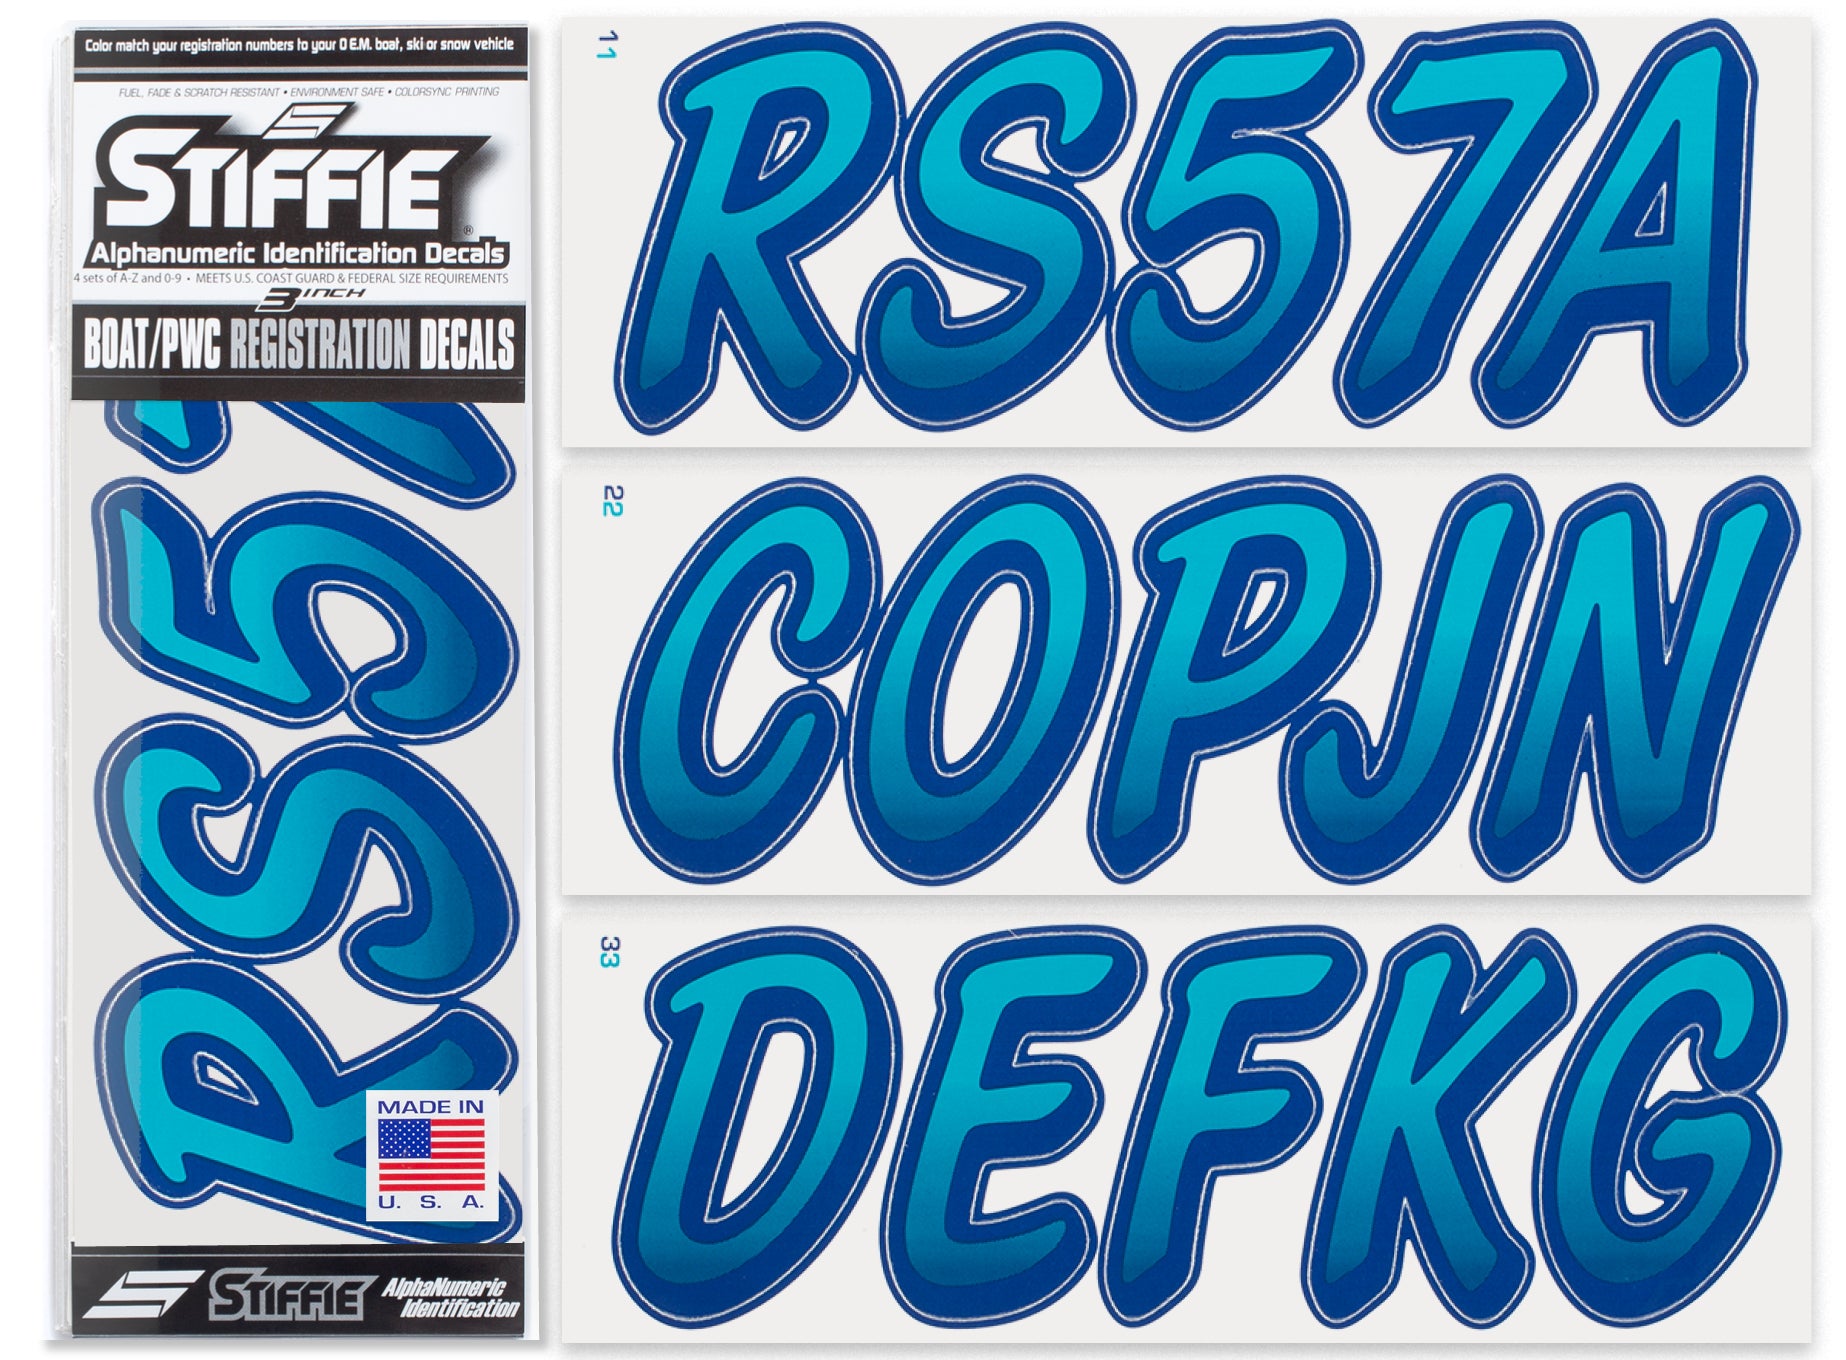 STIFFIE Whipline Aqua/Navy 3" Alpha-Numeric Registration Identification Numbers Stickers Decals for Boats & Personal Watercraft